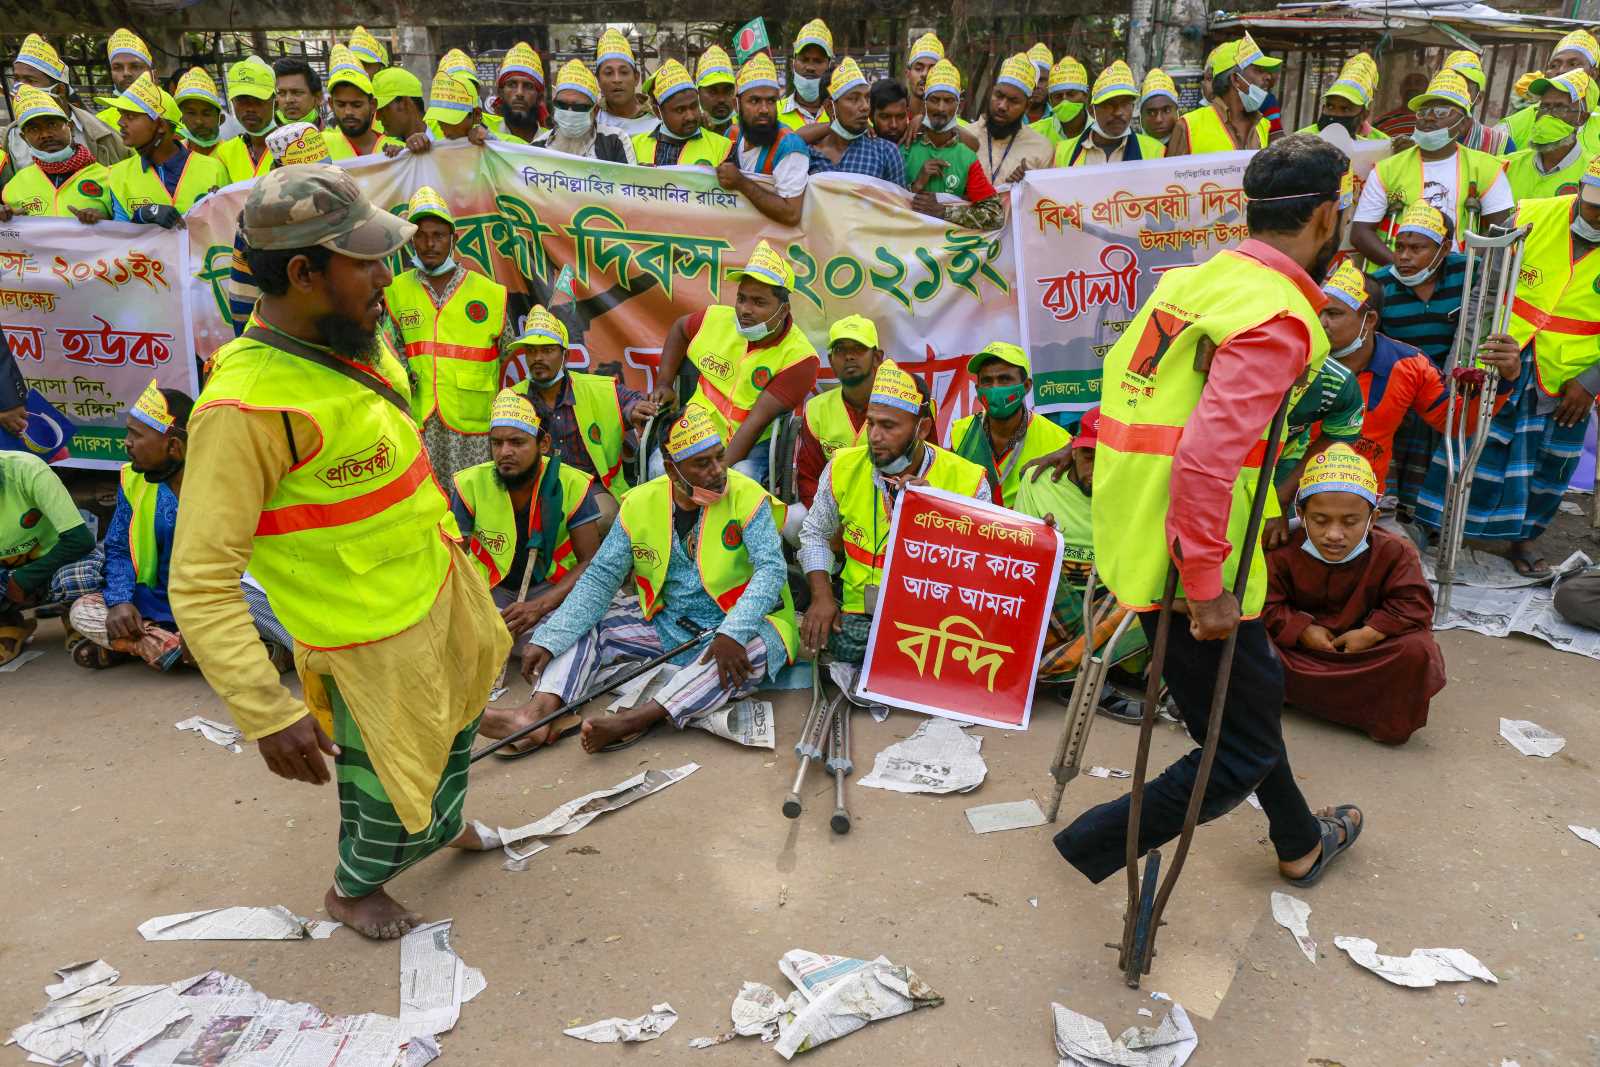 Attending a World Disability Day rally in Dhaka on 3 December 2021.